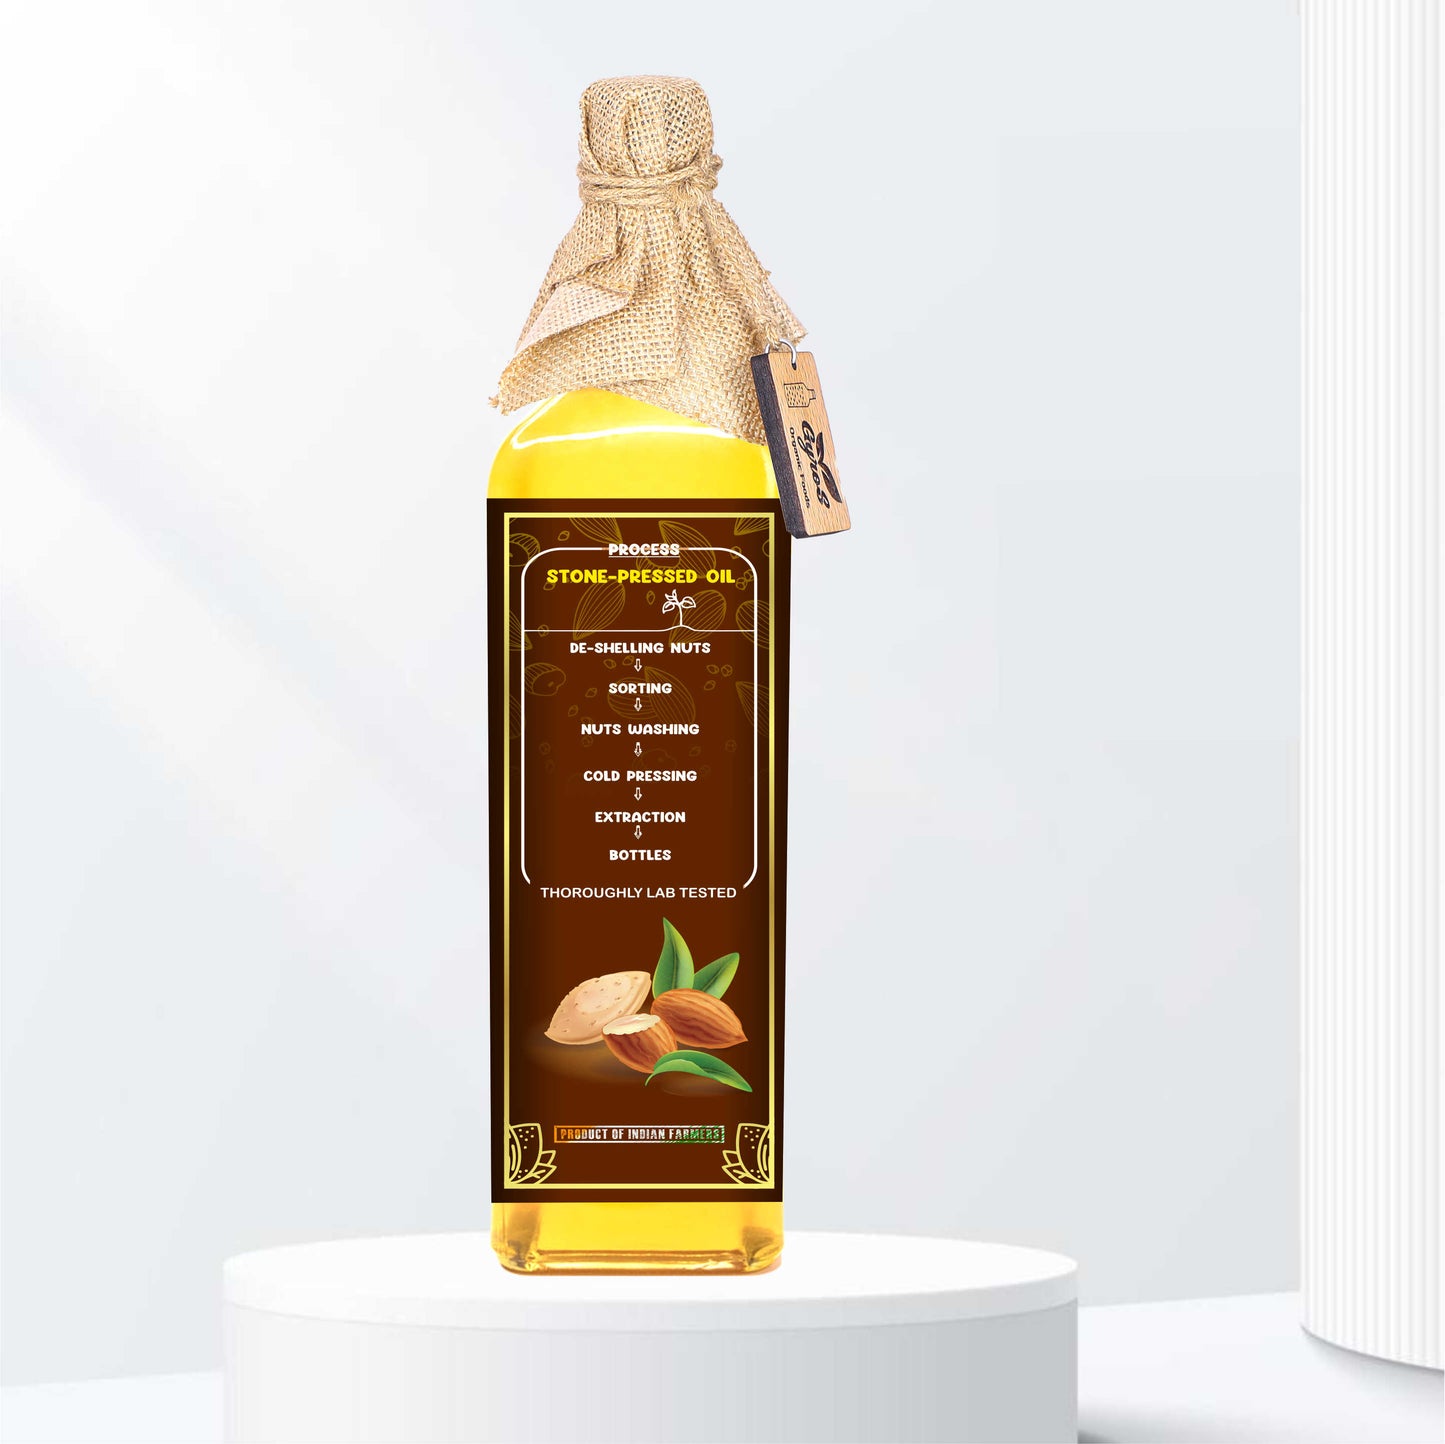 Almond Oil | Stone-Wood Pressed Oil | Unfiltered | Premium Unadulterated Chemical free product |